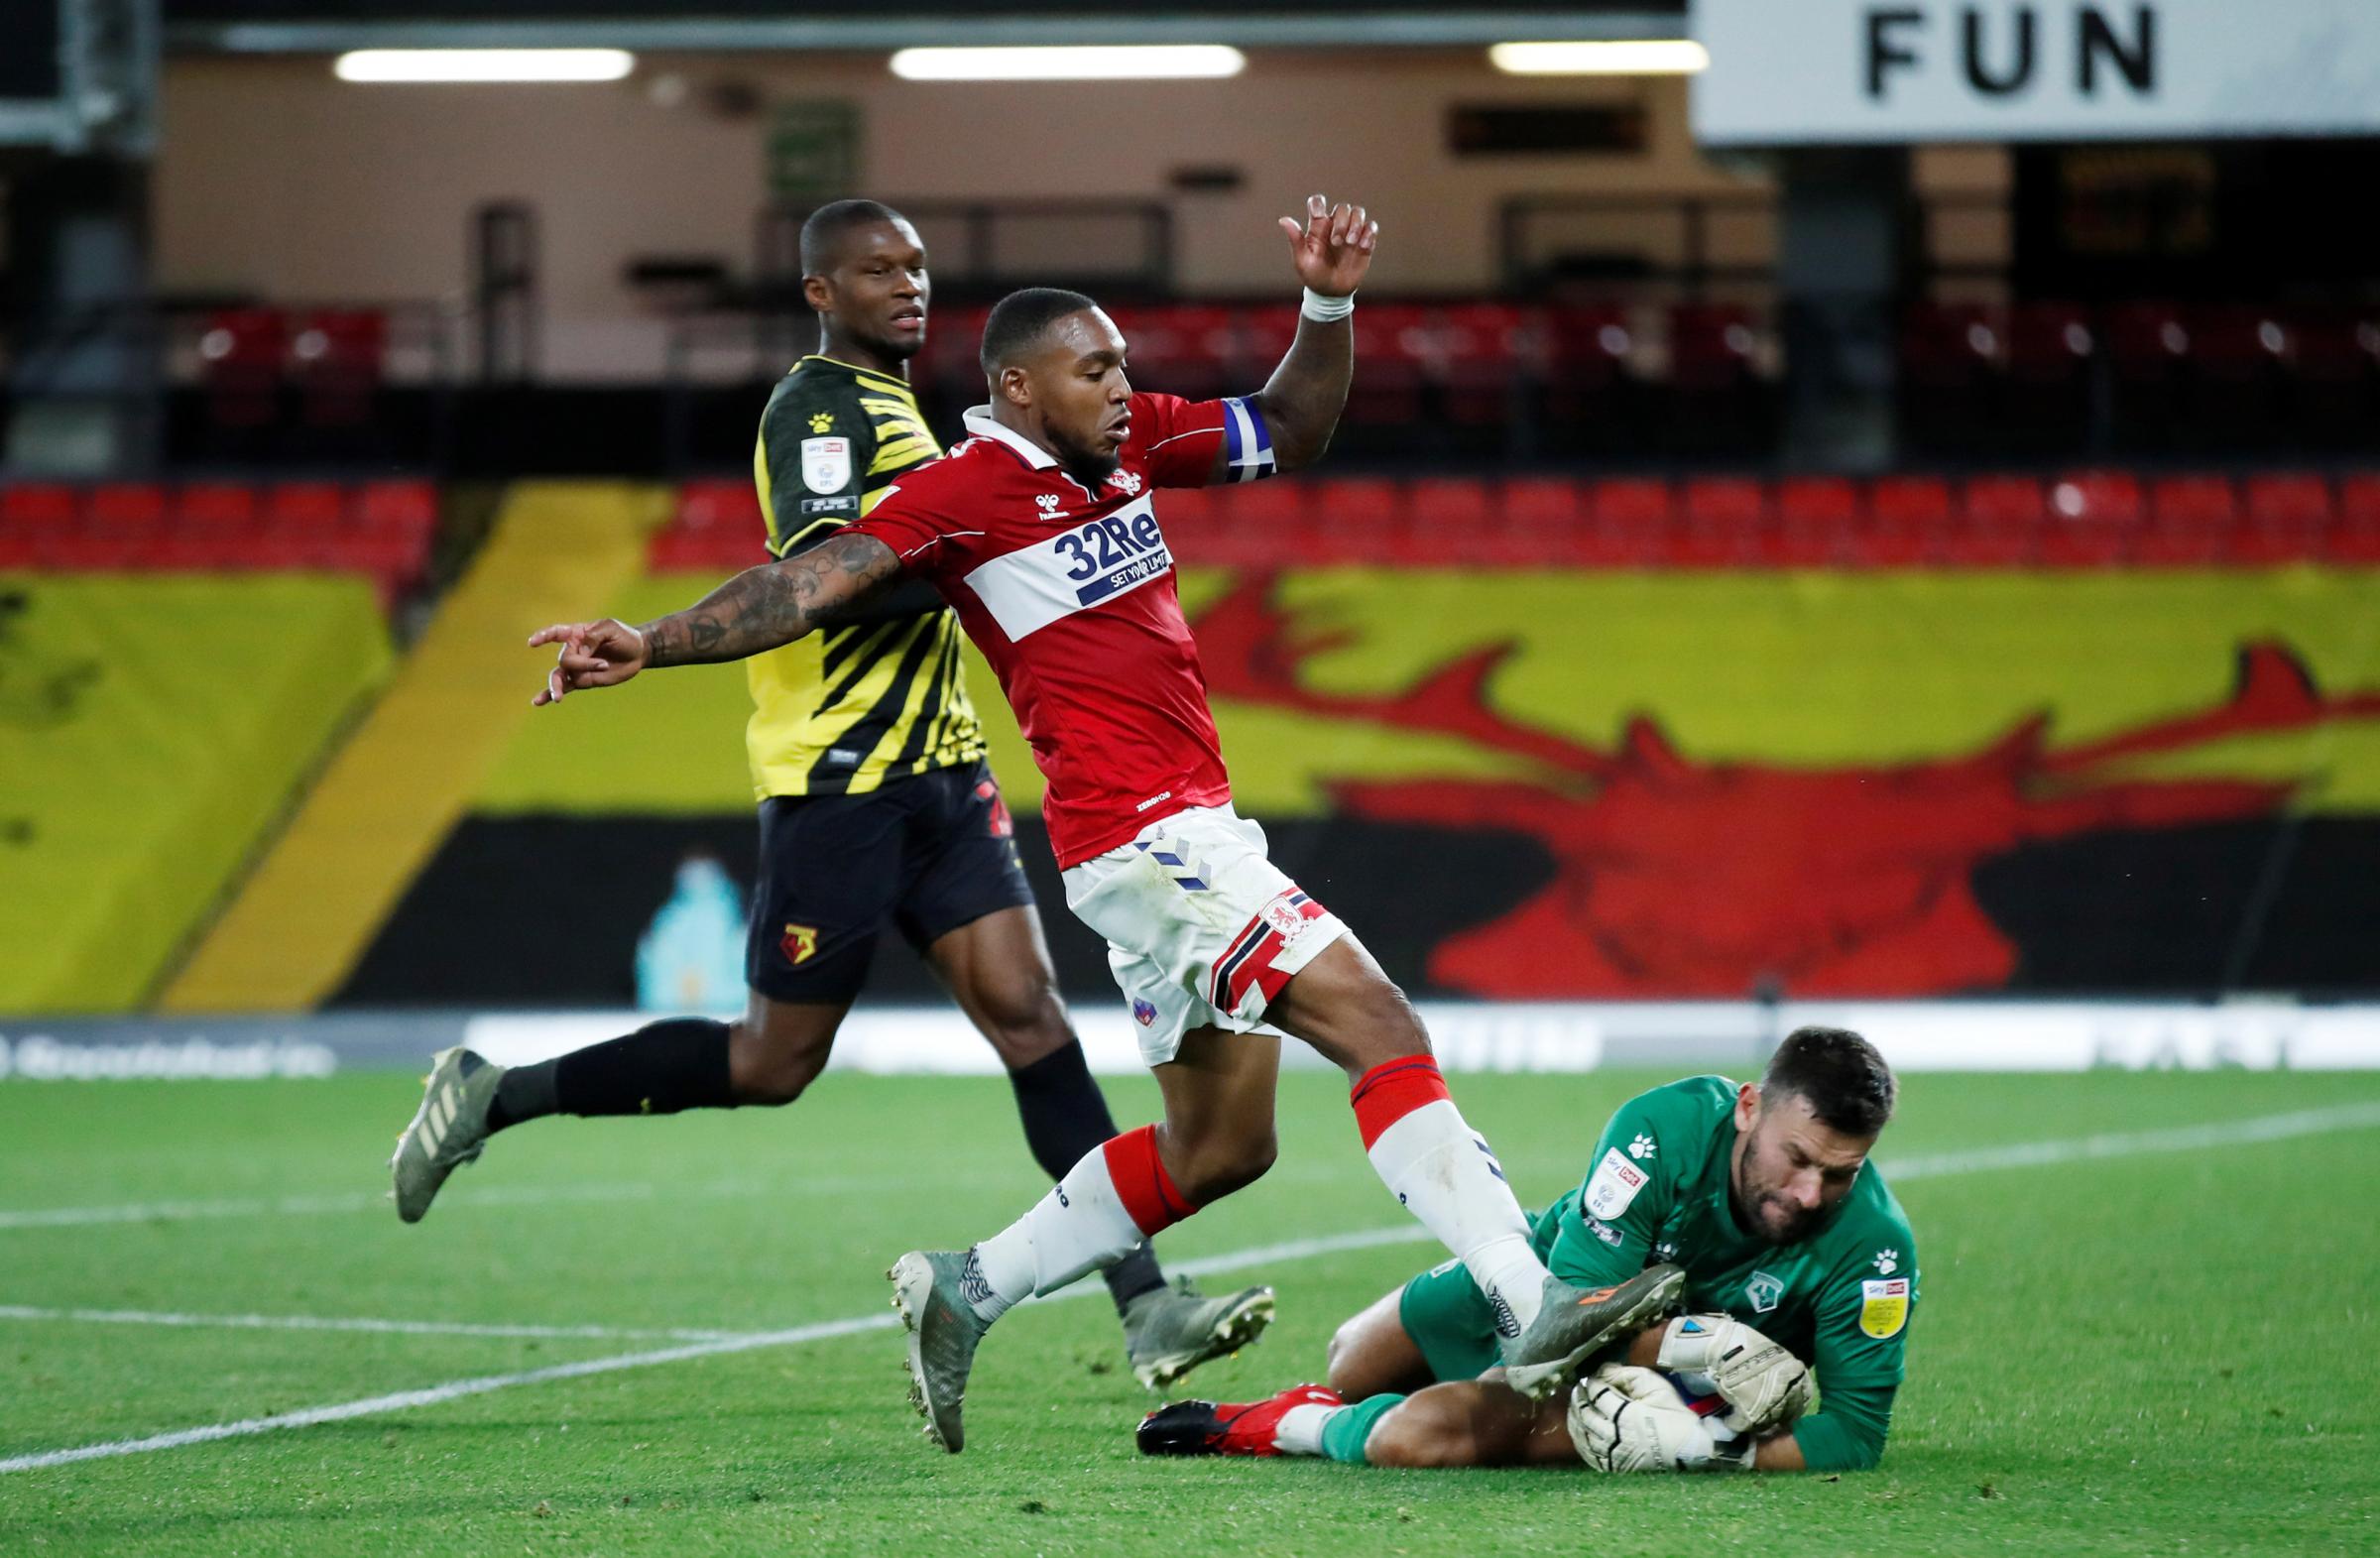 Assombalonga wants to repay Watford for the start they gave him